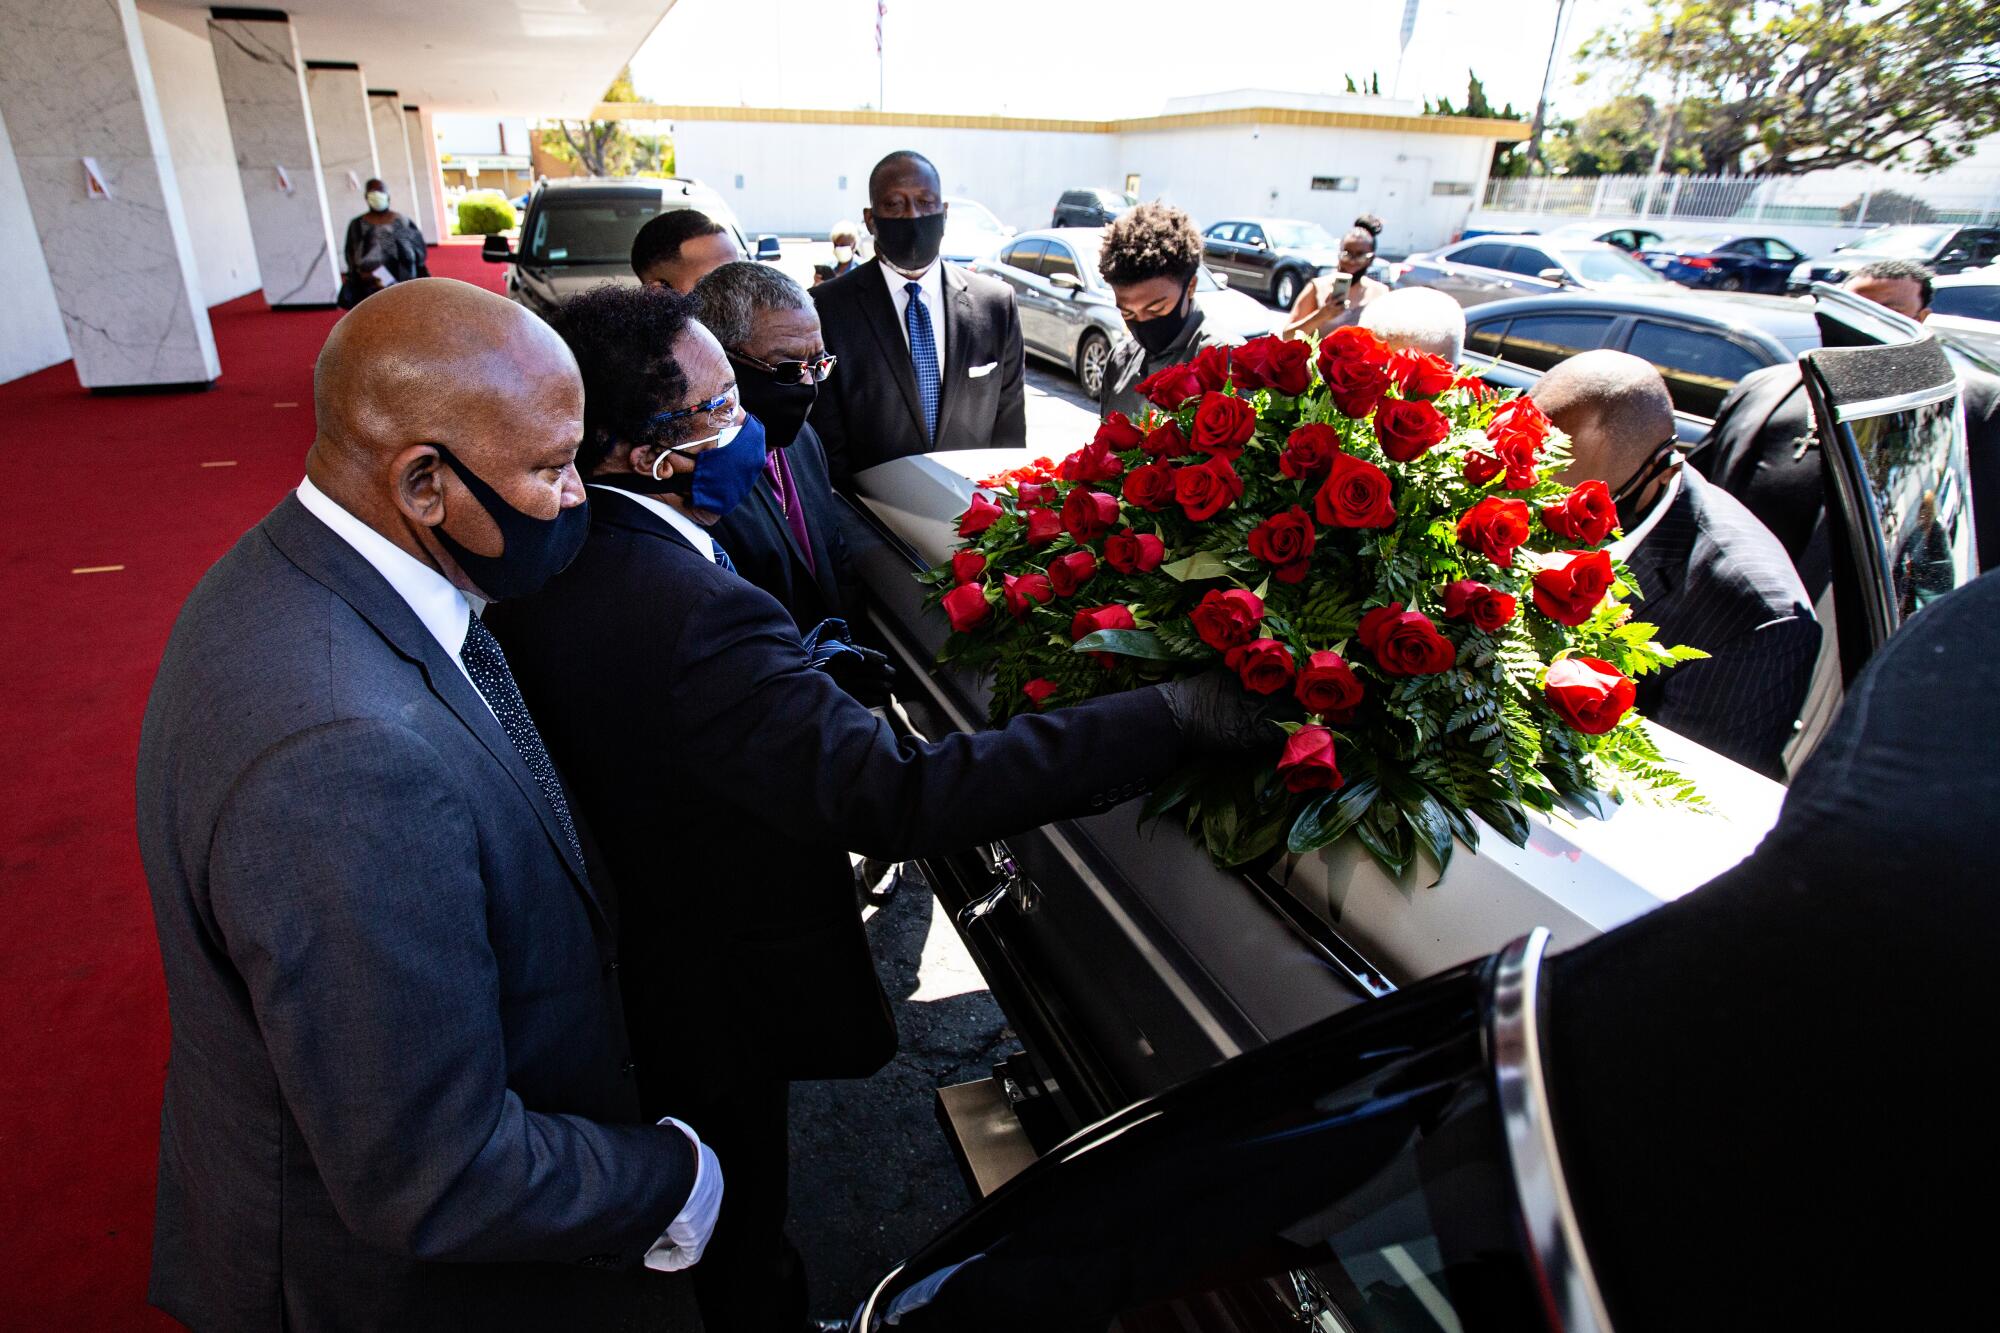 Family members load the casket carrying Charles Jackson Jr., who died from COVID-19, April 15 at the Angelus Funeral Home in Los Angeles.